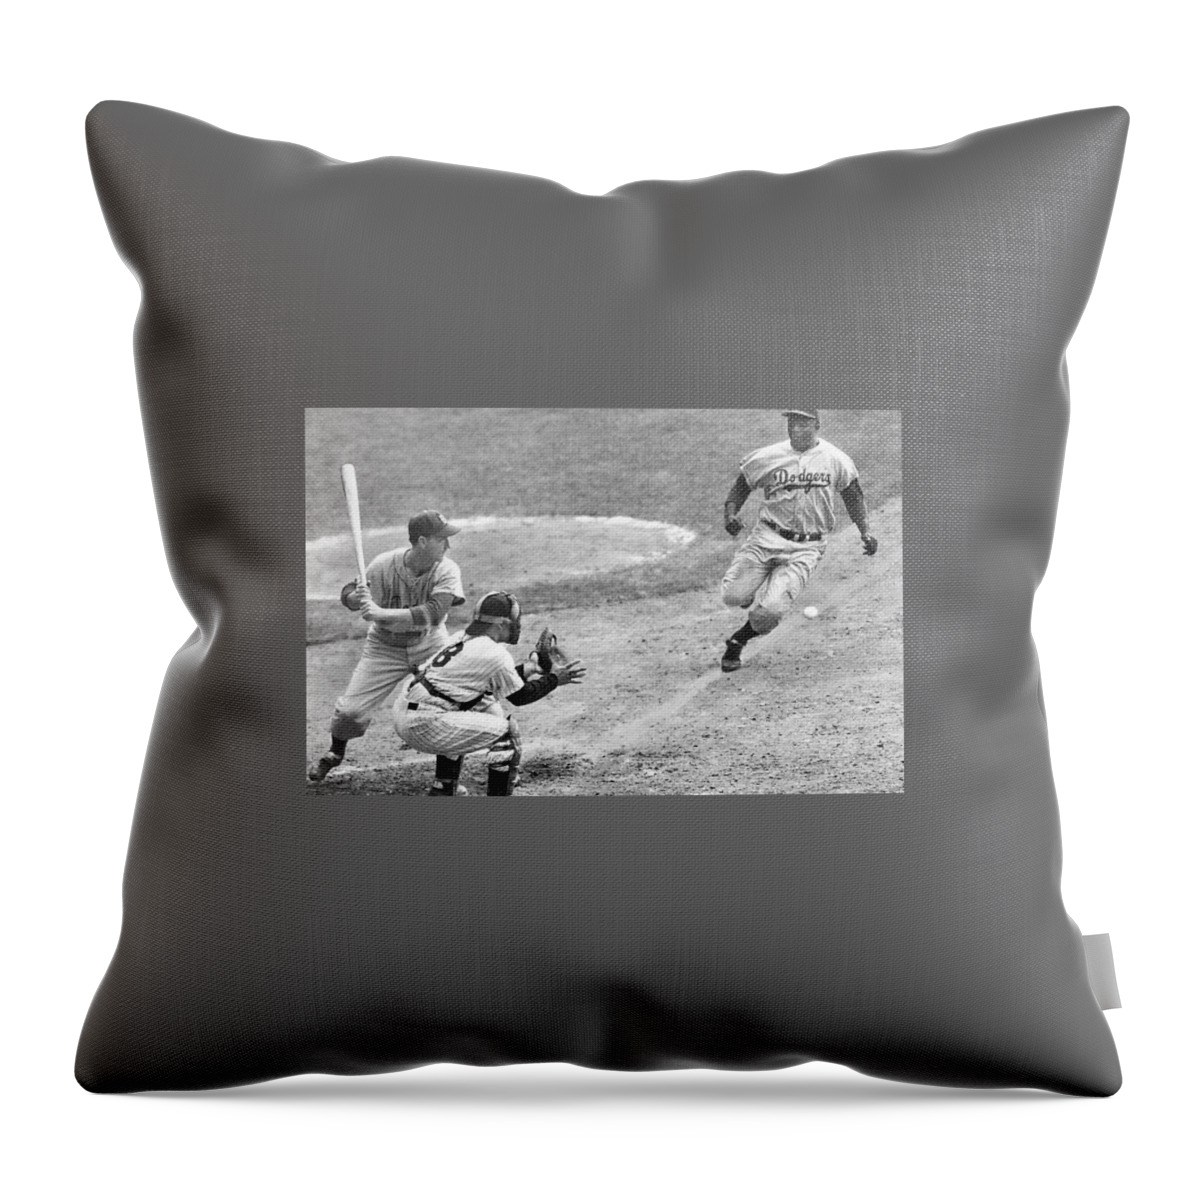 Jackie Robinson Stealing Home Plate With Yogi Berra Catching In 8th Inning Of 1st Game In World Series 1955 Throw Pillow featuring the photograph Jackie robinson stealing home Yogi Berra catcher in 1st game 1955 world series by David Lee Guss